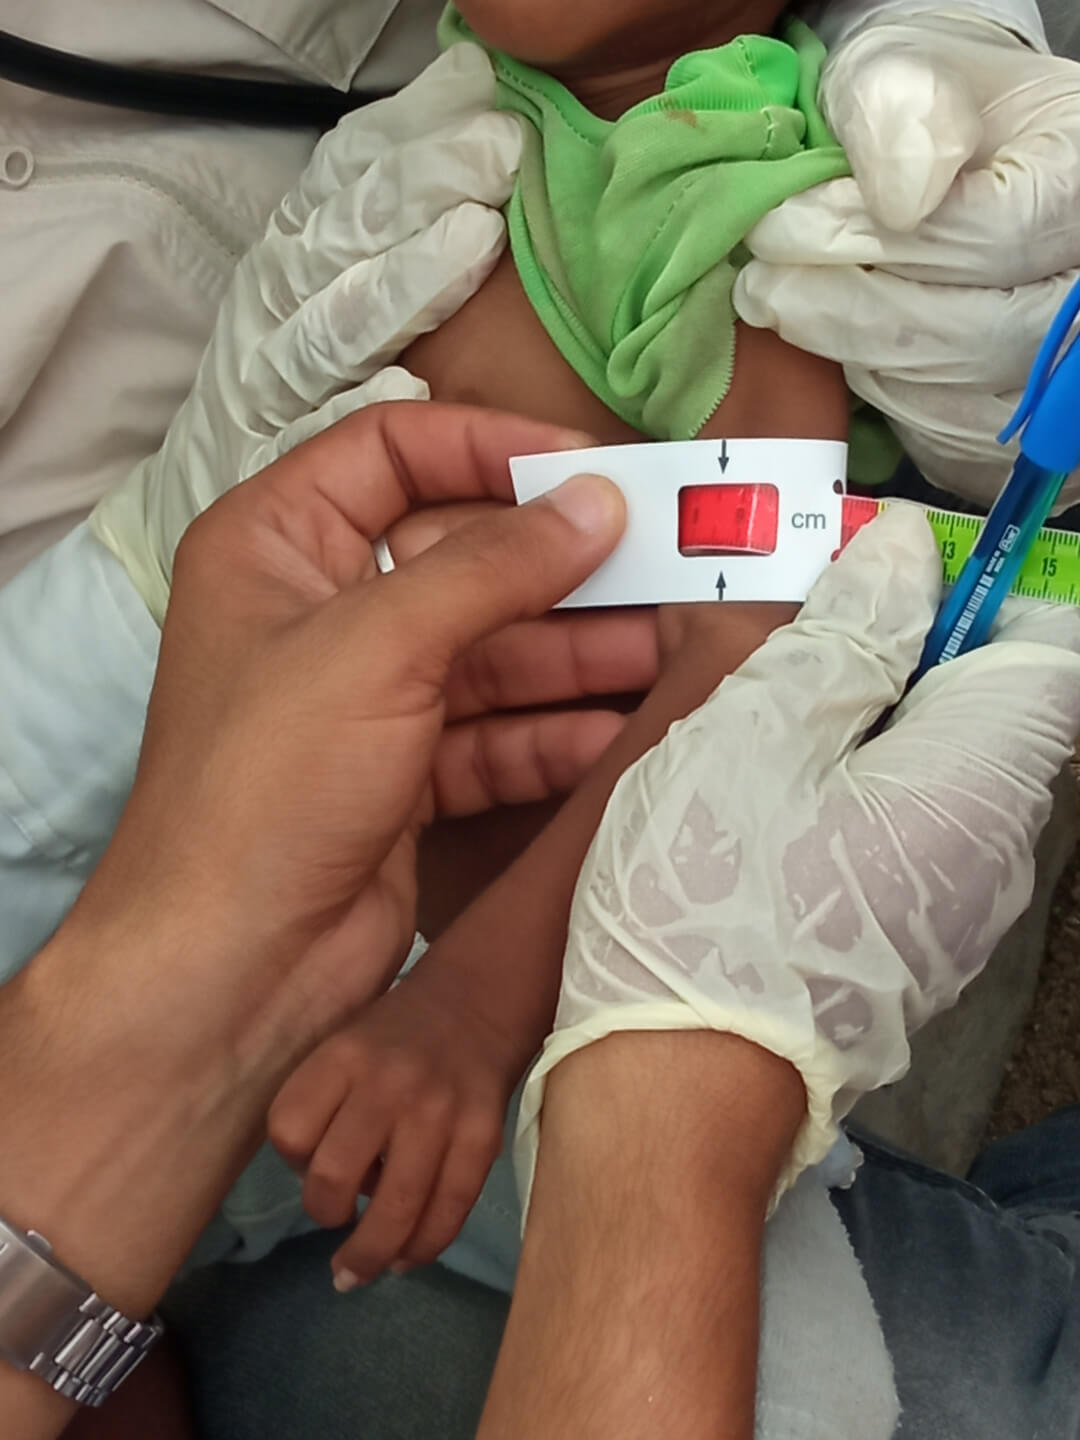 A mobile team member measures a child for malnutrition. The red color shows on the tape when the arm size is too thin for a healthy child.